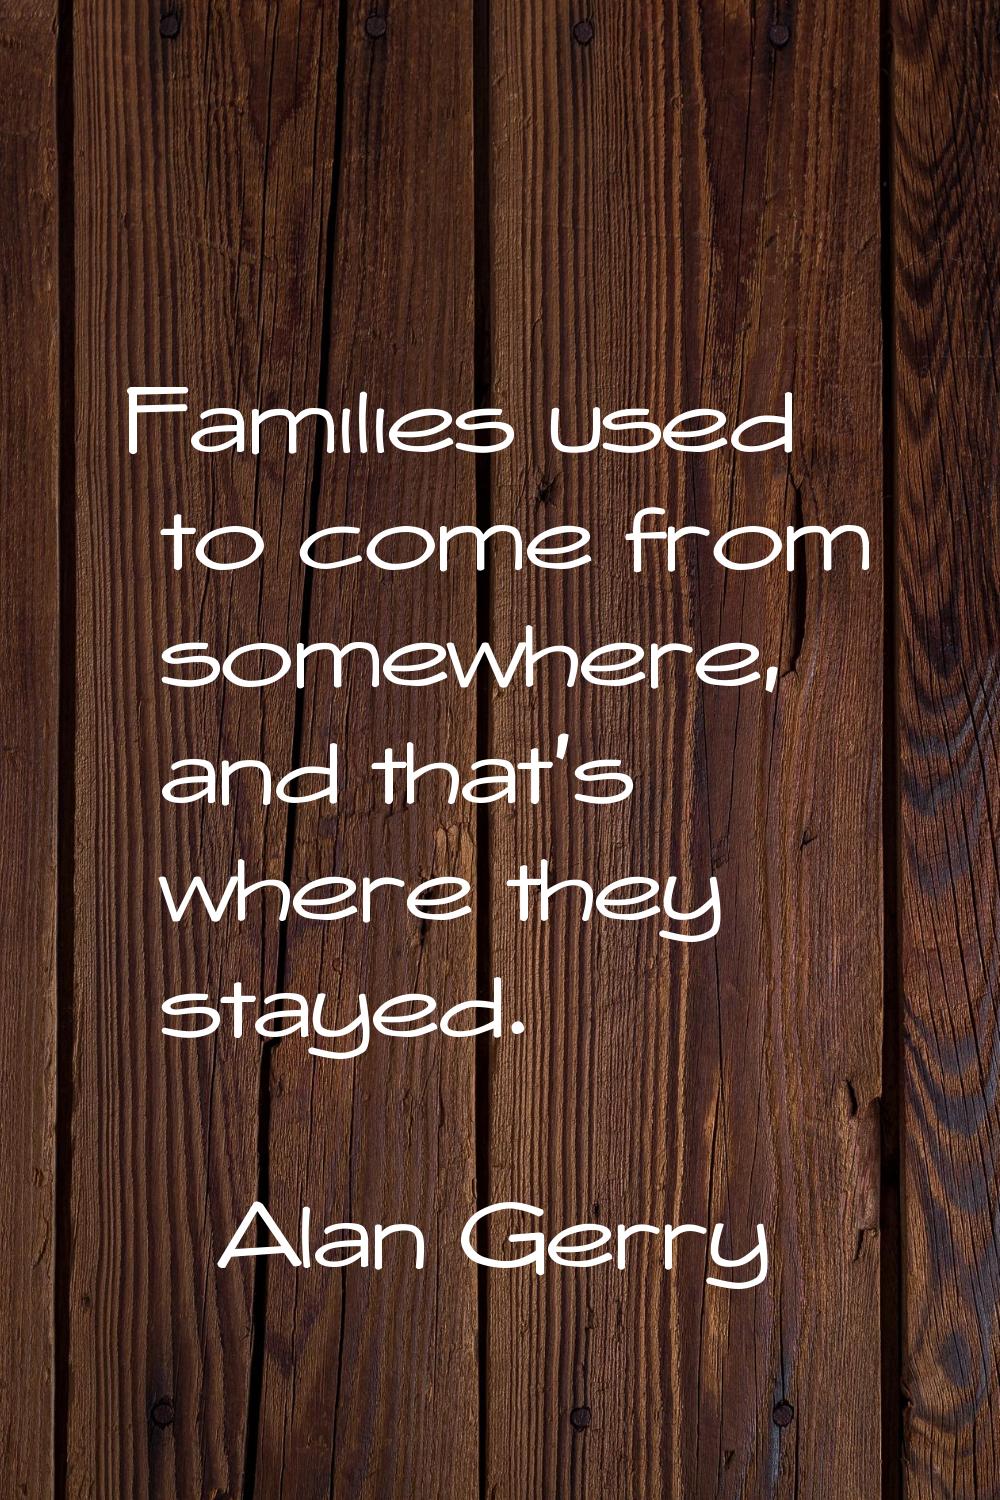 Families used to come from somewhere, and that's where they stayed.